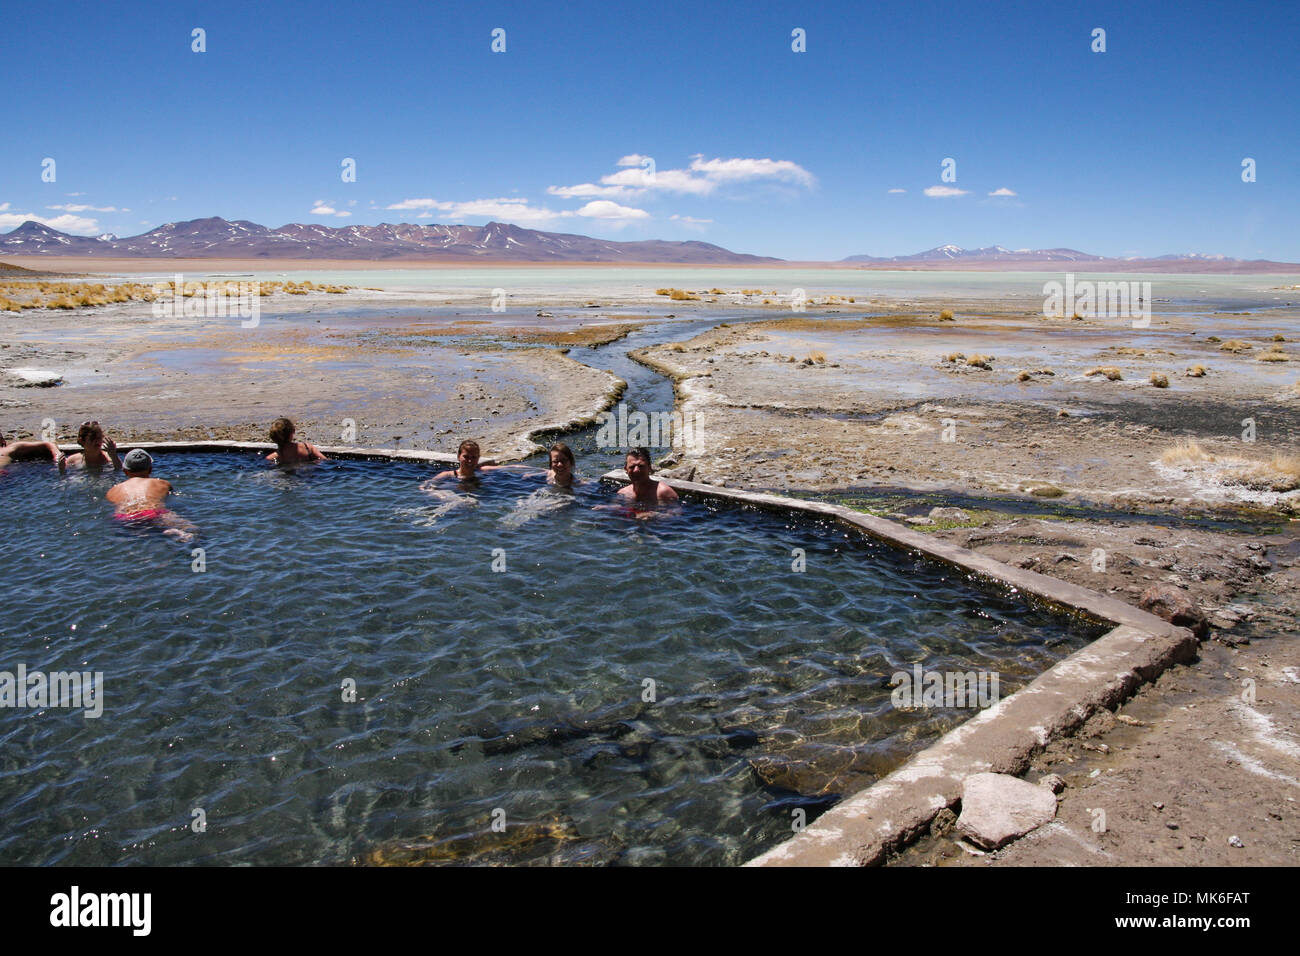 TUPIZA, BOLIVIA - SEPTEMBER 23, 2011: A group of people relax in the hot springs of Salar de Uyuni while enjoying the stunning desert scenery Stock Photo